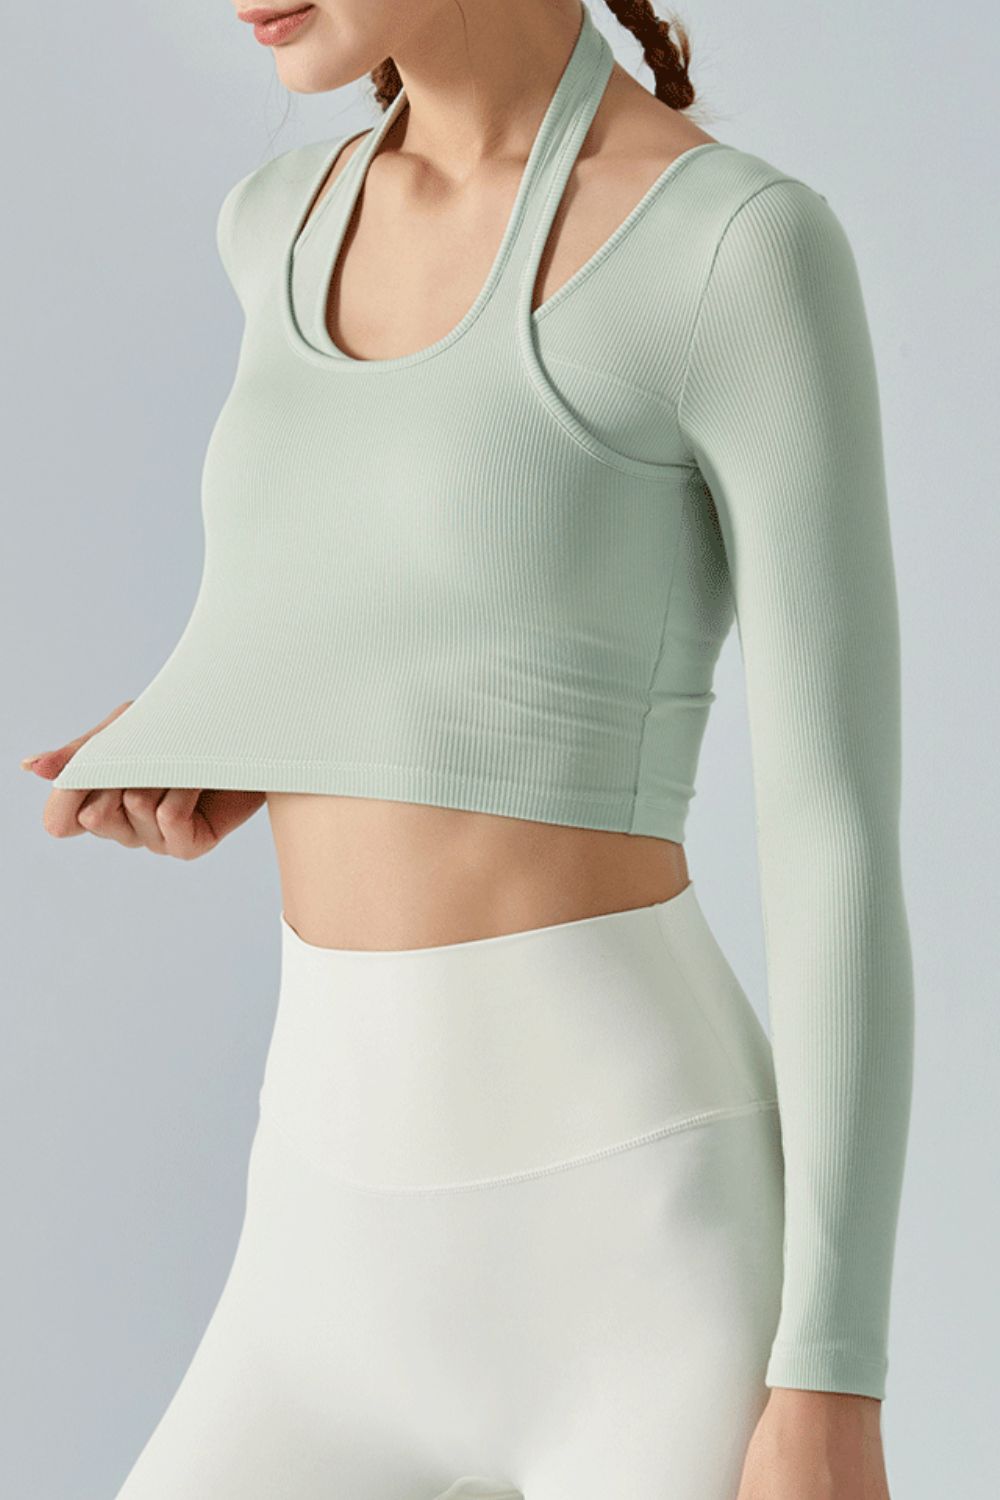 Halter Neck Long Sleeve Cropped Sports Top – The Gypsy Den